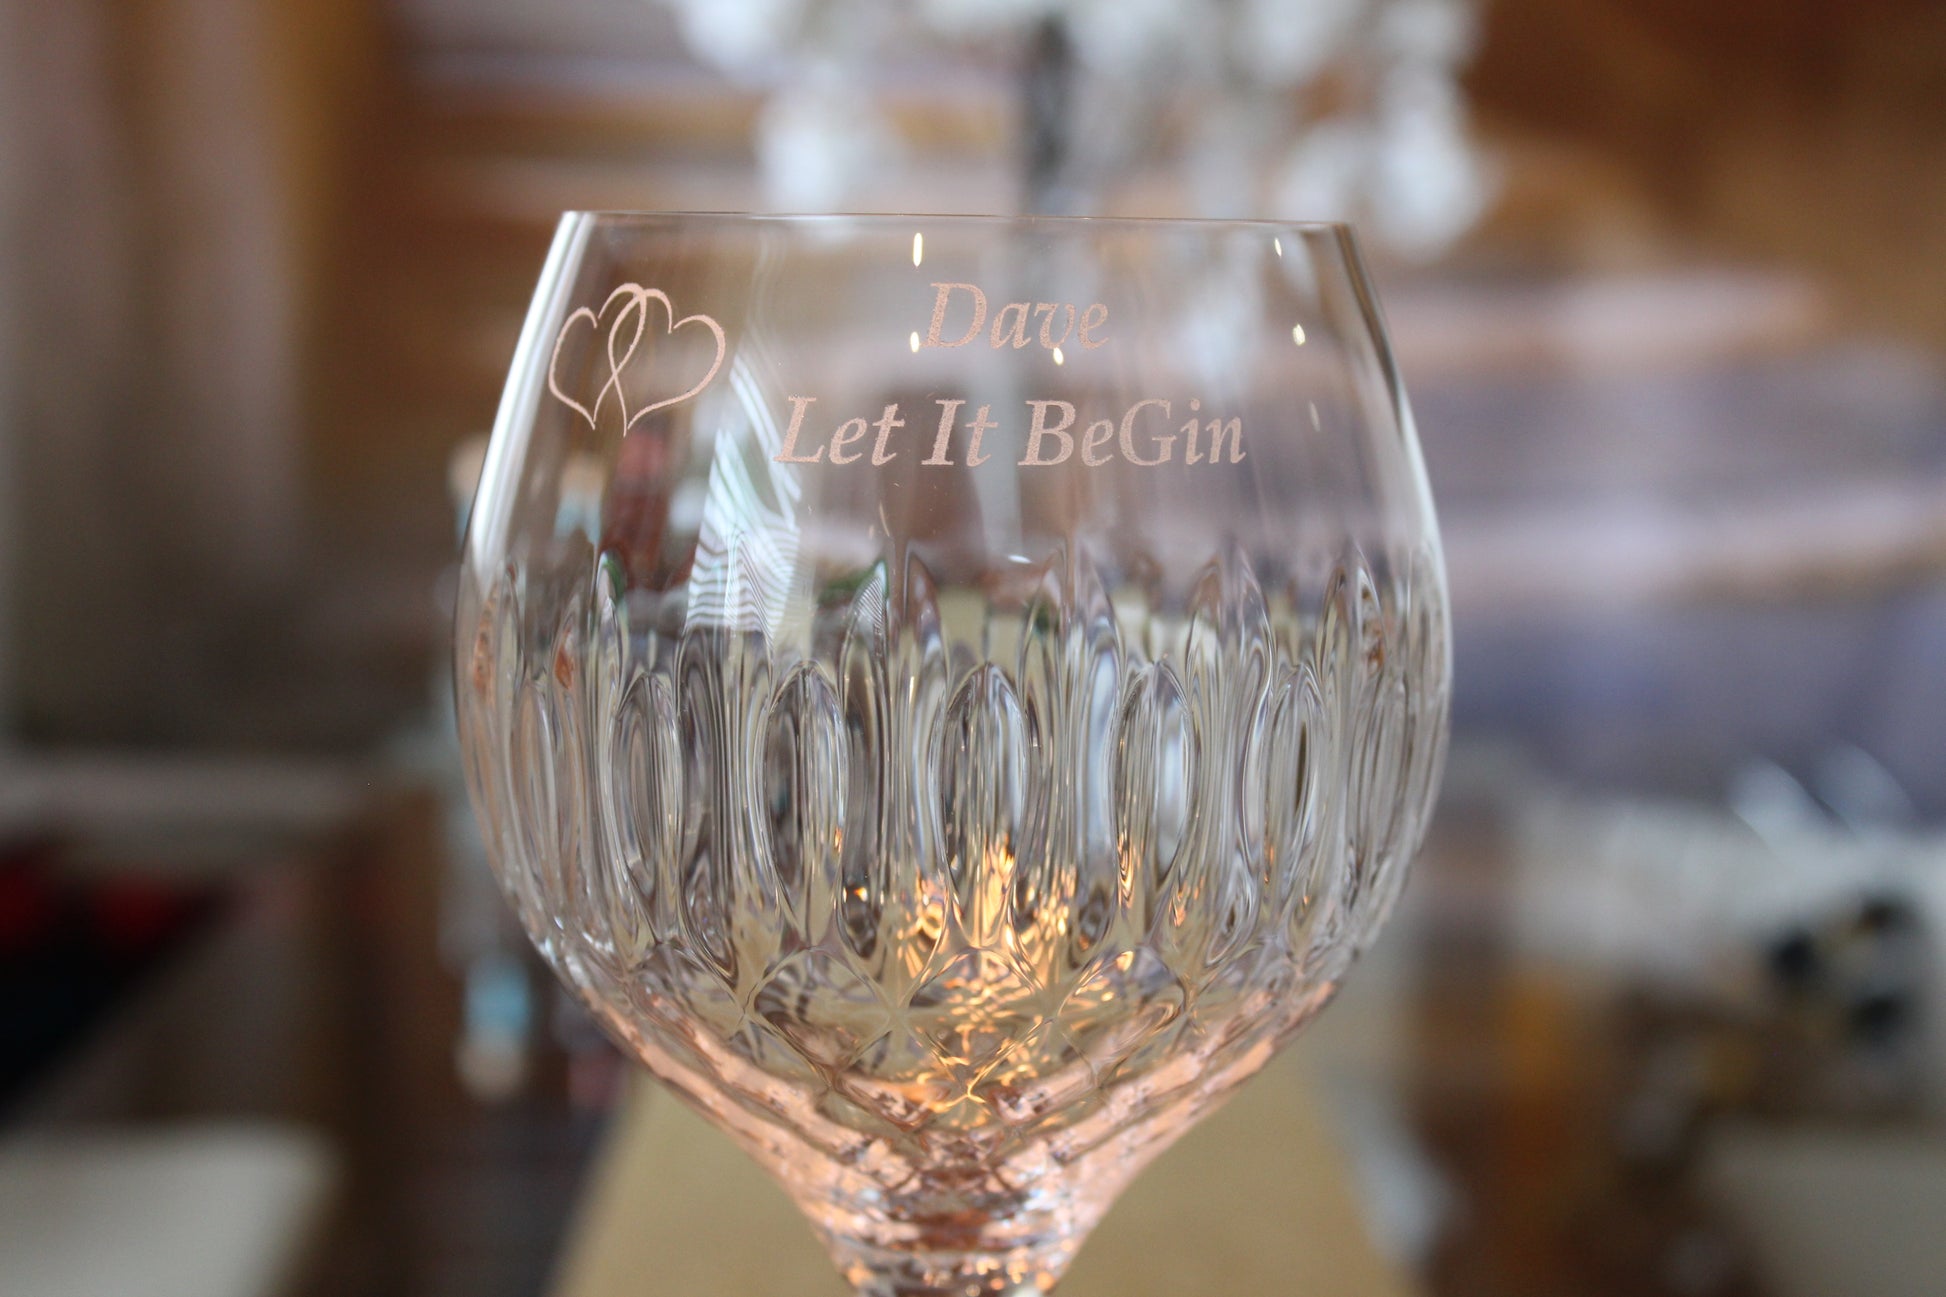 Half picture shot of the gin glass focusing on the engraved words